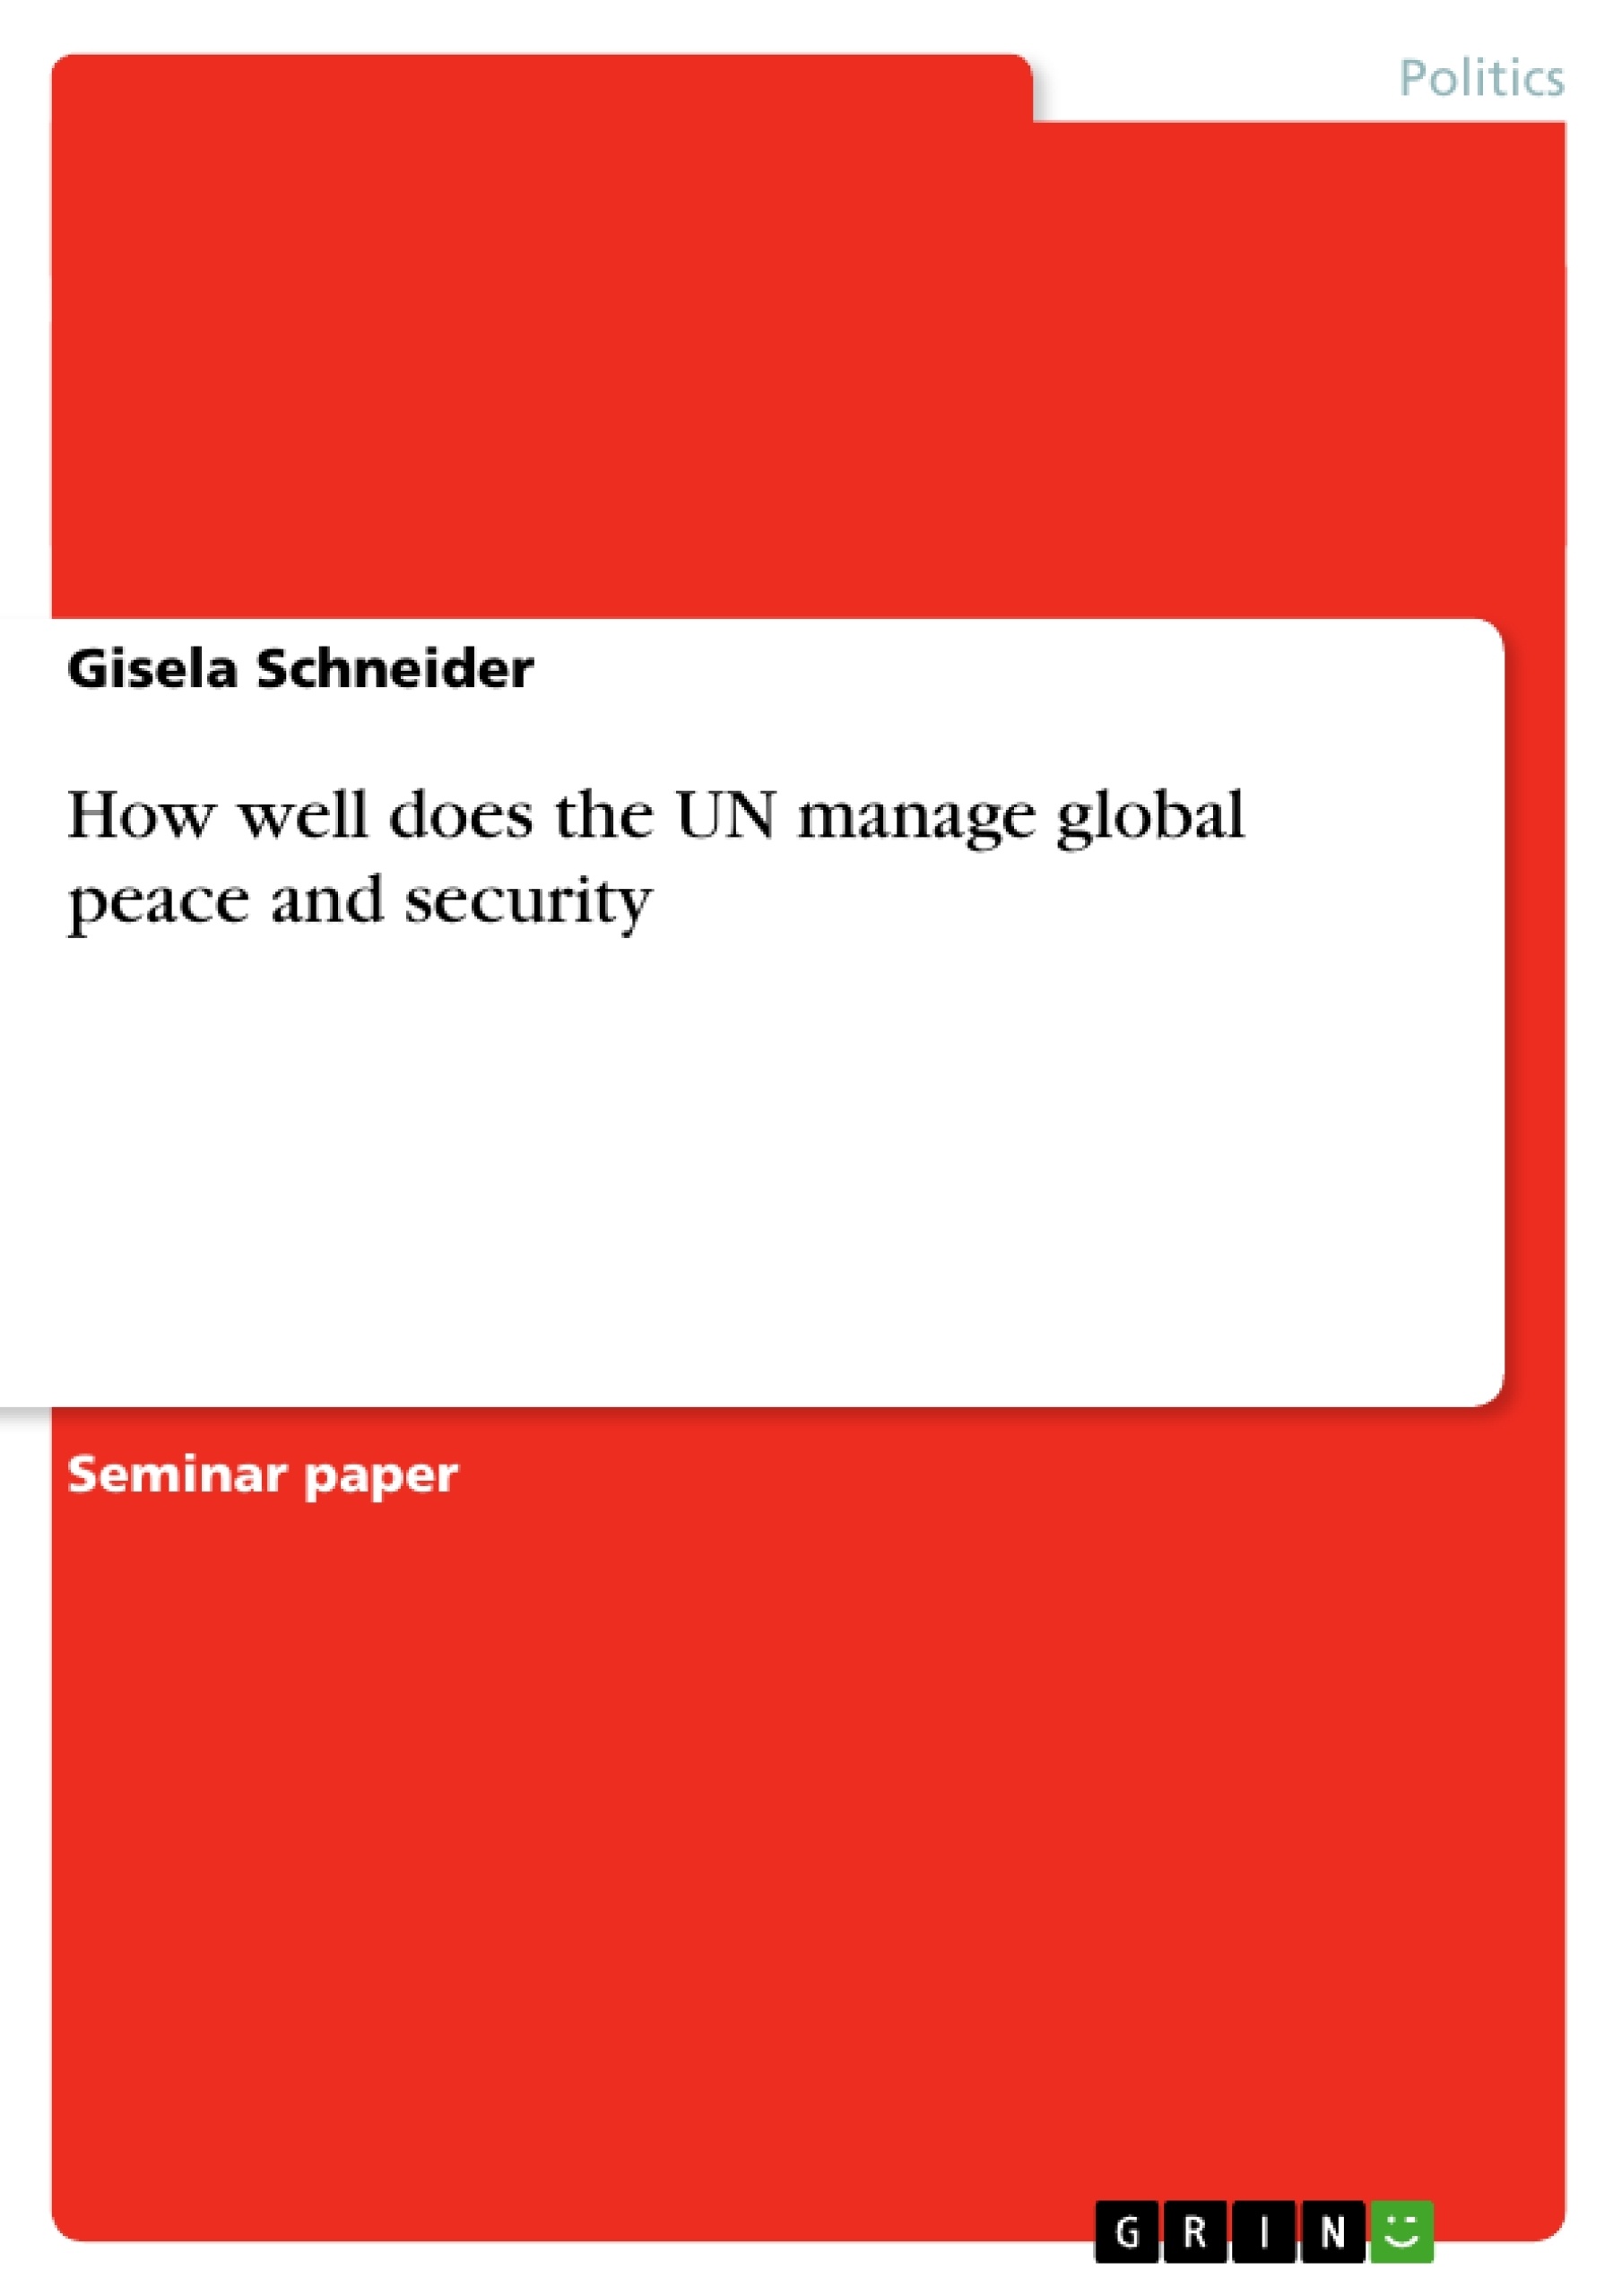 Title: How well does the UN manage global peace and security